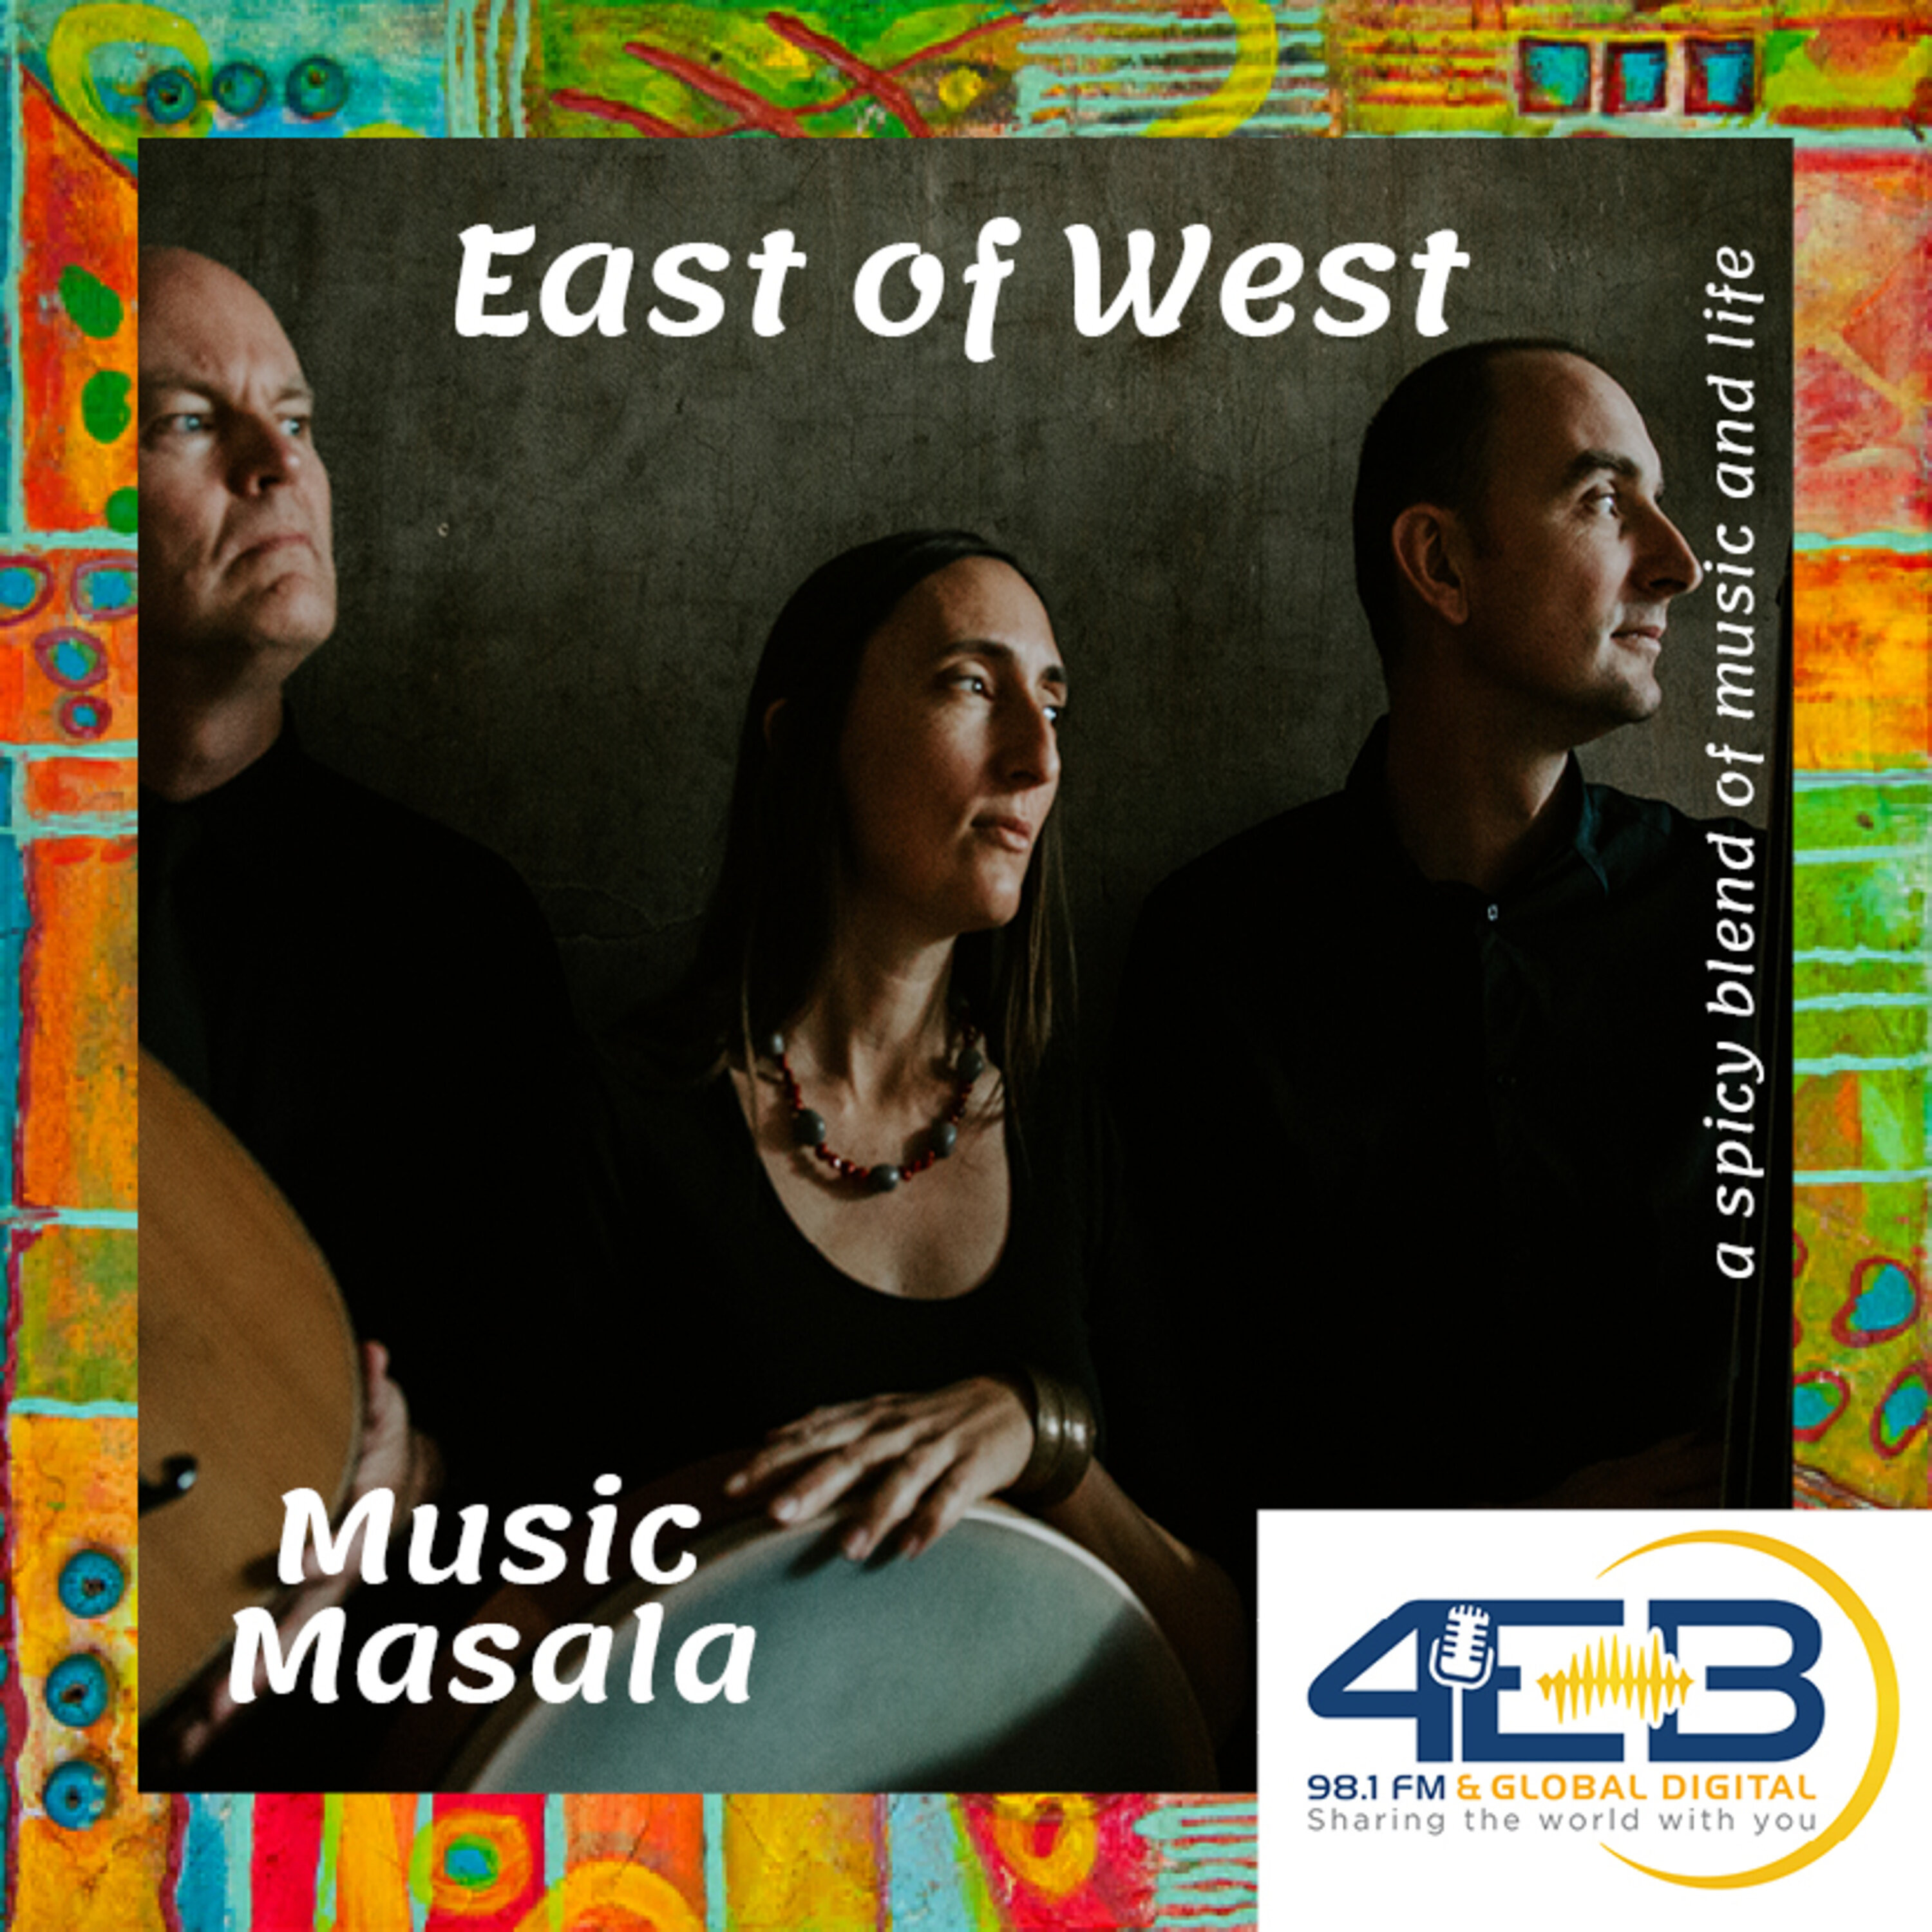 Music Masala - East of West